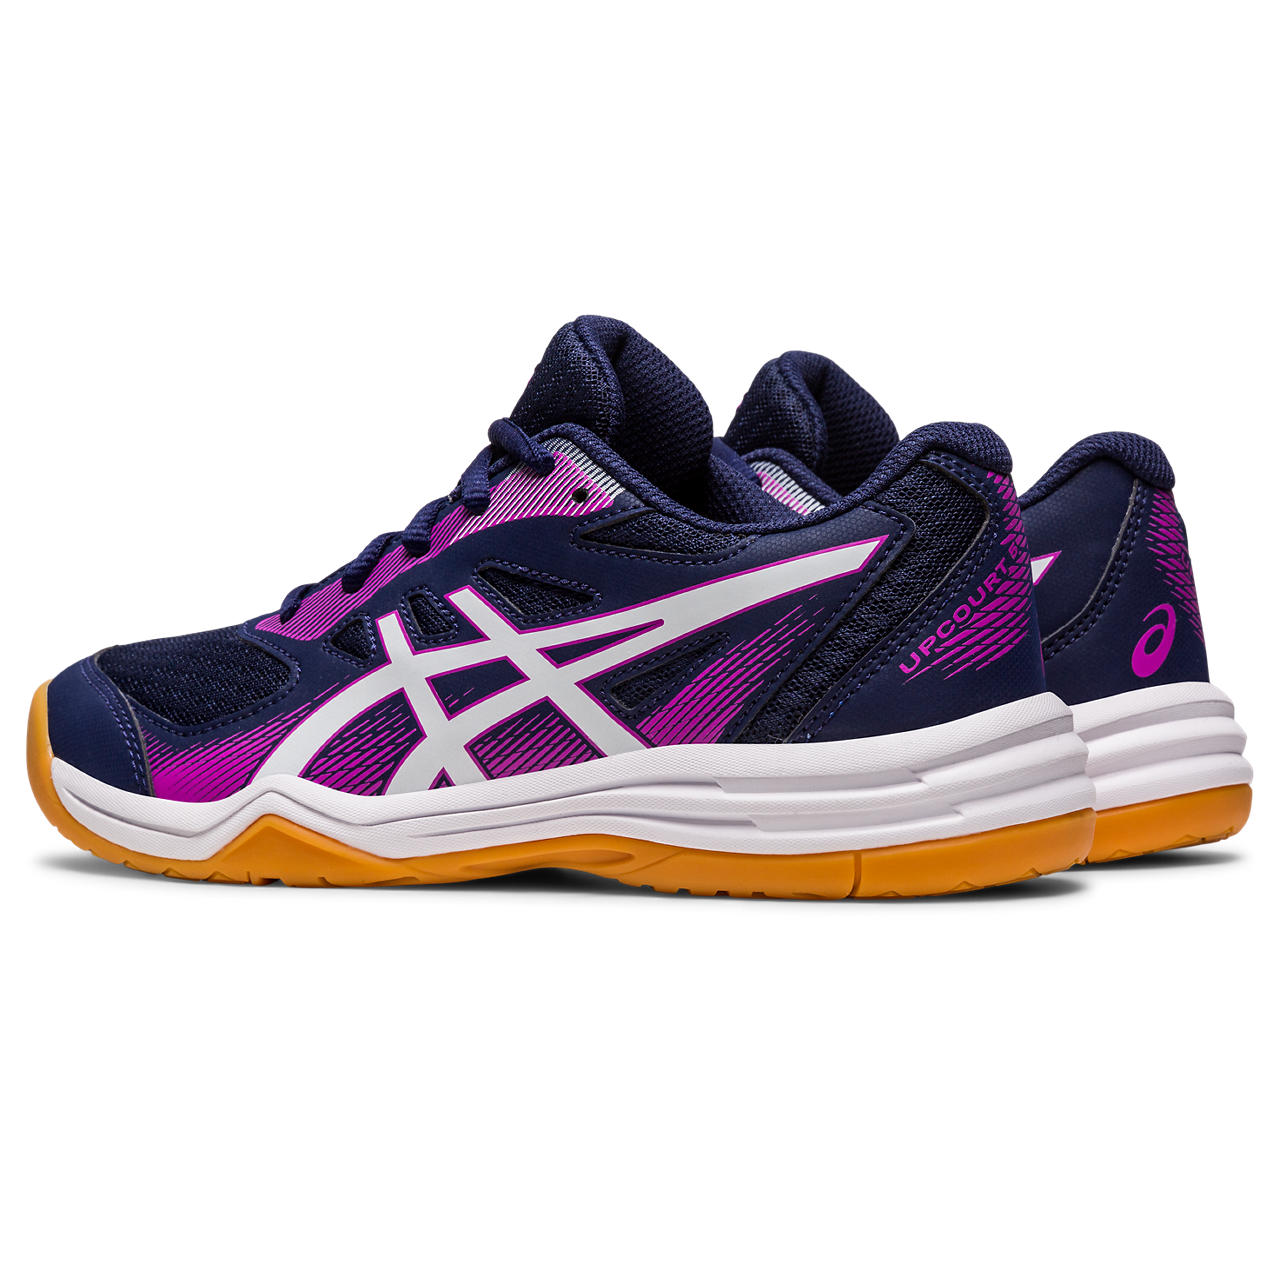 ASICS UPCOURT 5 GS image number null